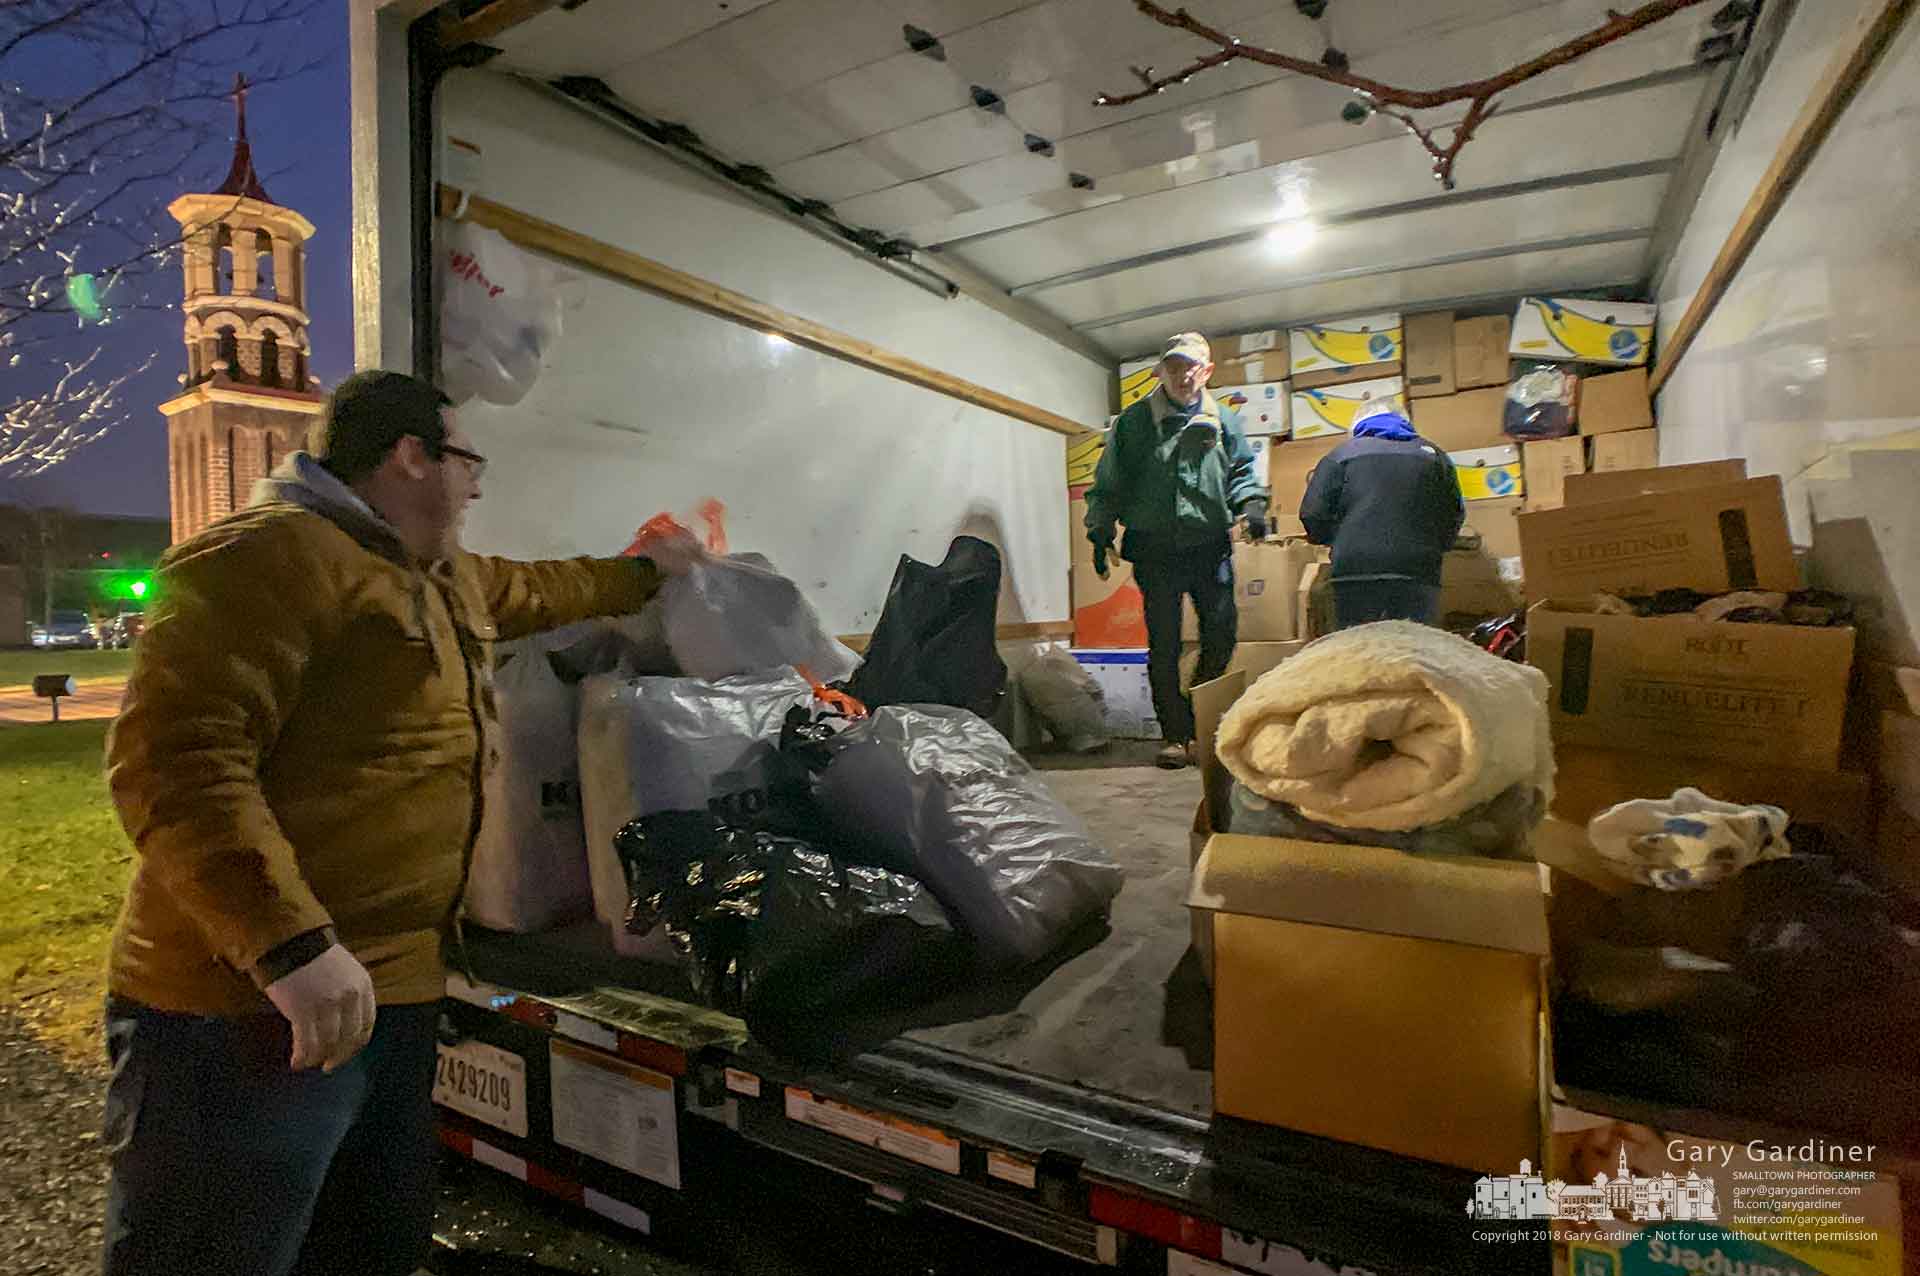 Volunteers gather coats and blankets in front of St. Paul the Apostle Catholic Church as donations for delivery to a charity in Kentucky for distribution at Christmas. My Final Photo for Dec. 16, 2018.